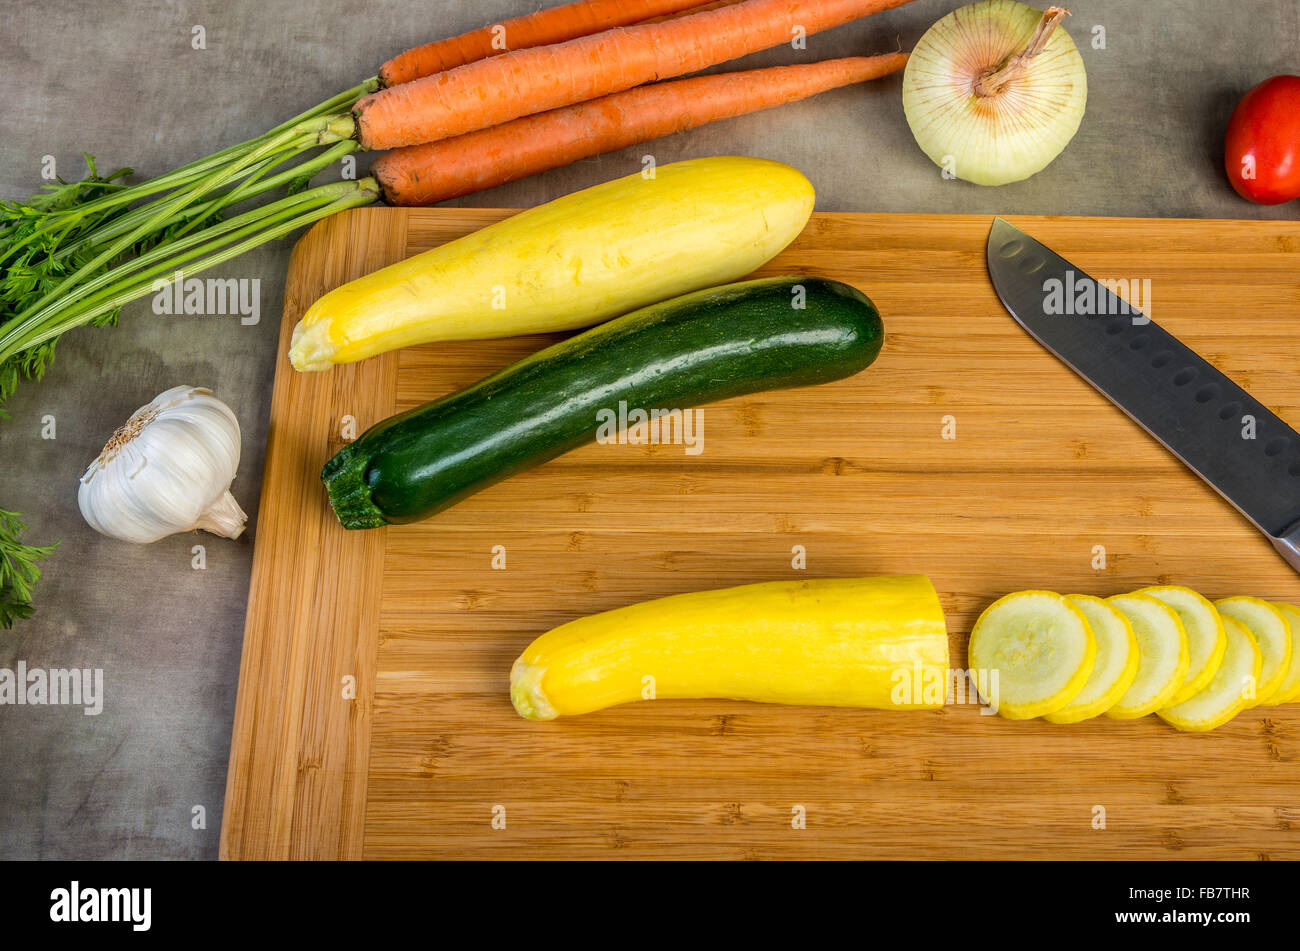 Wooden cutting board with vegetables Stock Photo